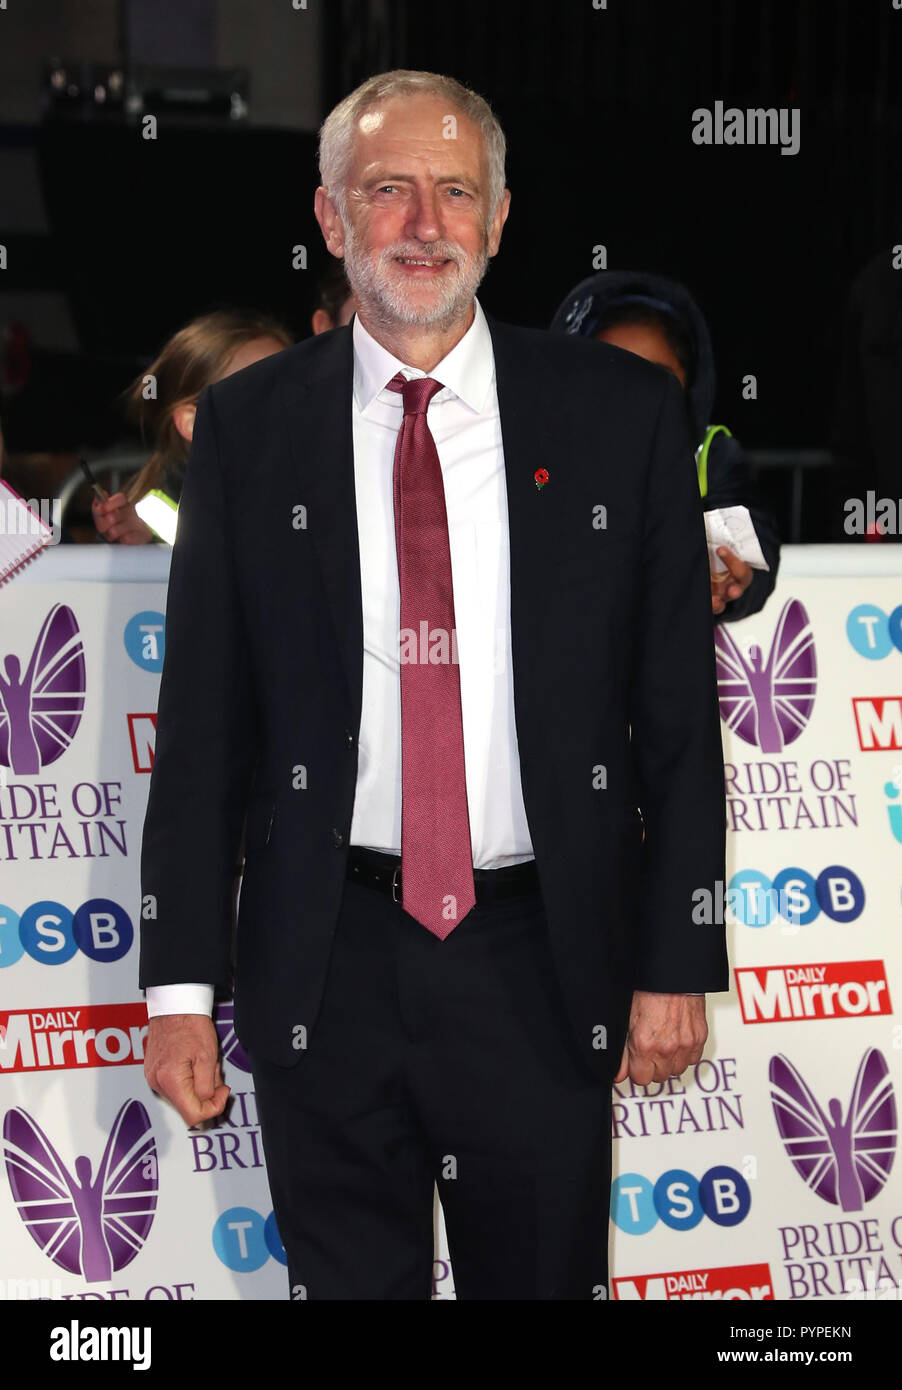 Jeremy Corbyn during the Pride Of Britain Awards 2018, in partnership with TSB, honouring the nation's unsung heroes and recognising the amazing achievements of ordinary people, held at the Grosvenor House Hotel, London. Stock Photo